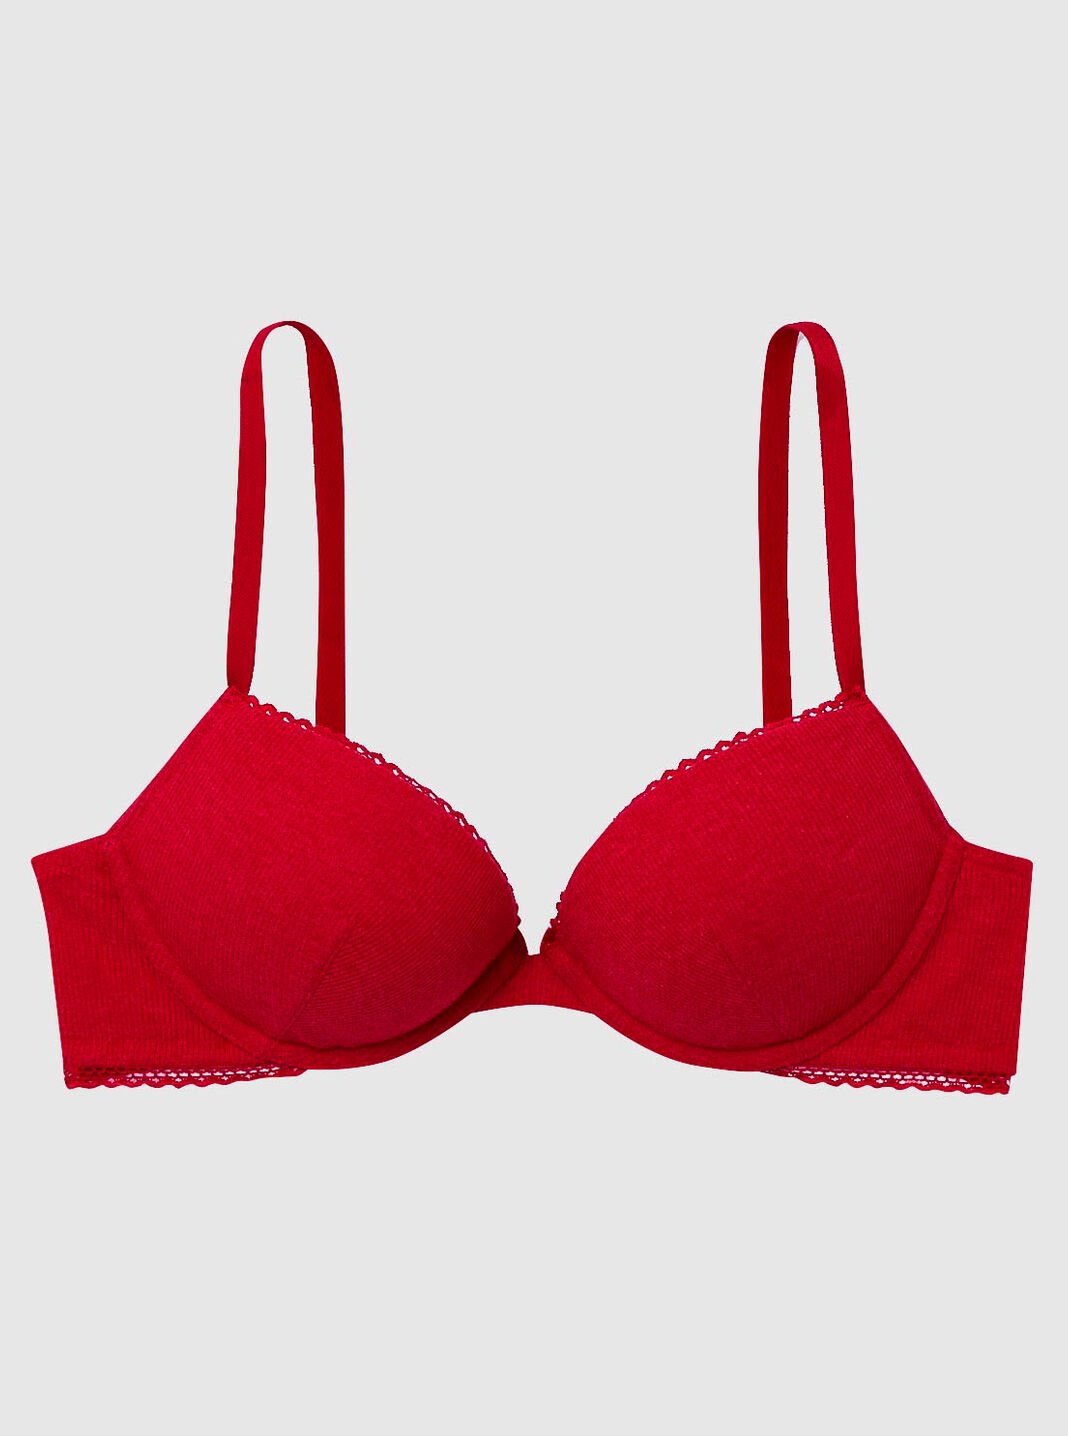 Midnightdivas - Invisible Pushup Bra <3 Most women find backless bras  without enough support or coverage. So, we created this bra with high  coverage, push-up cups with a curved neckline to go